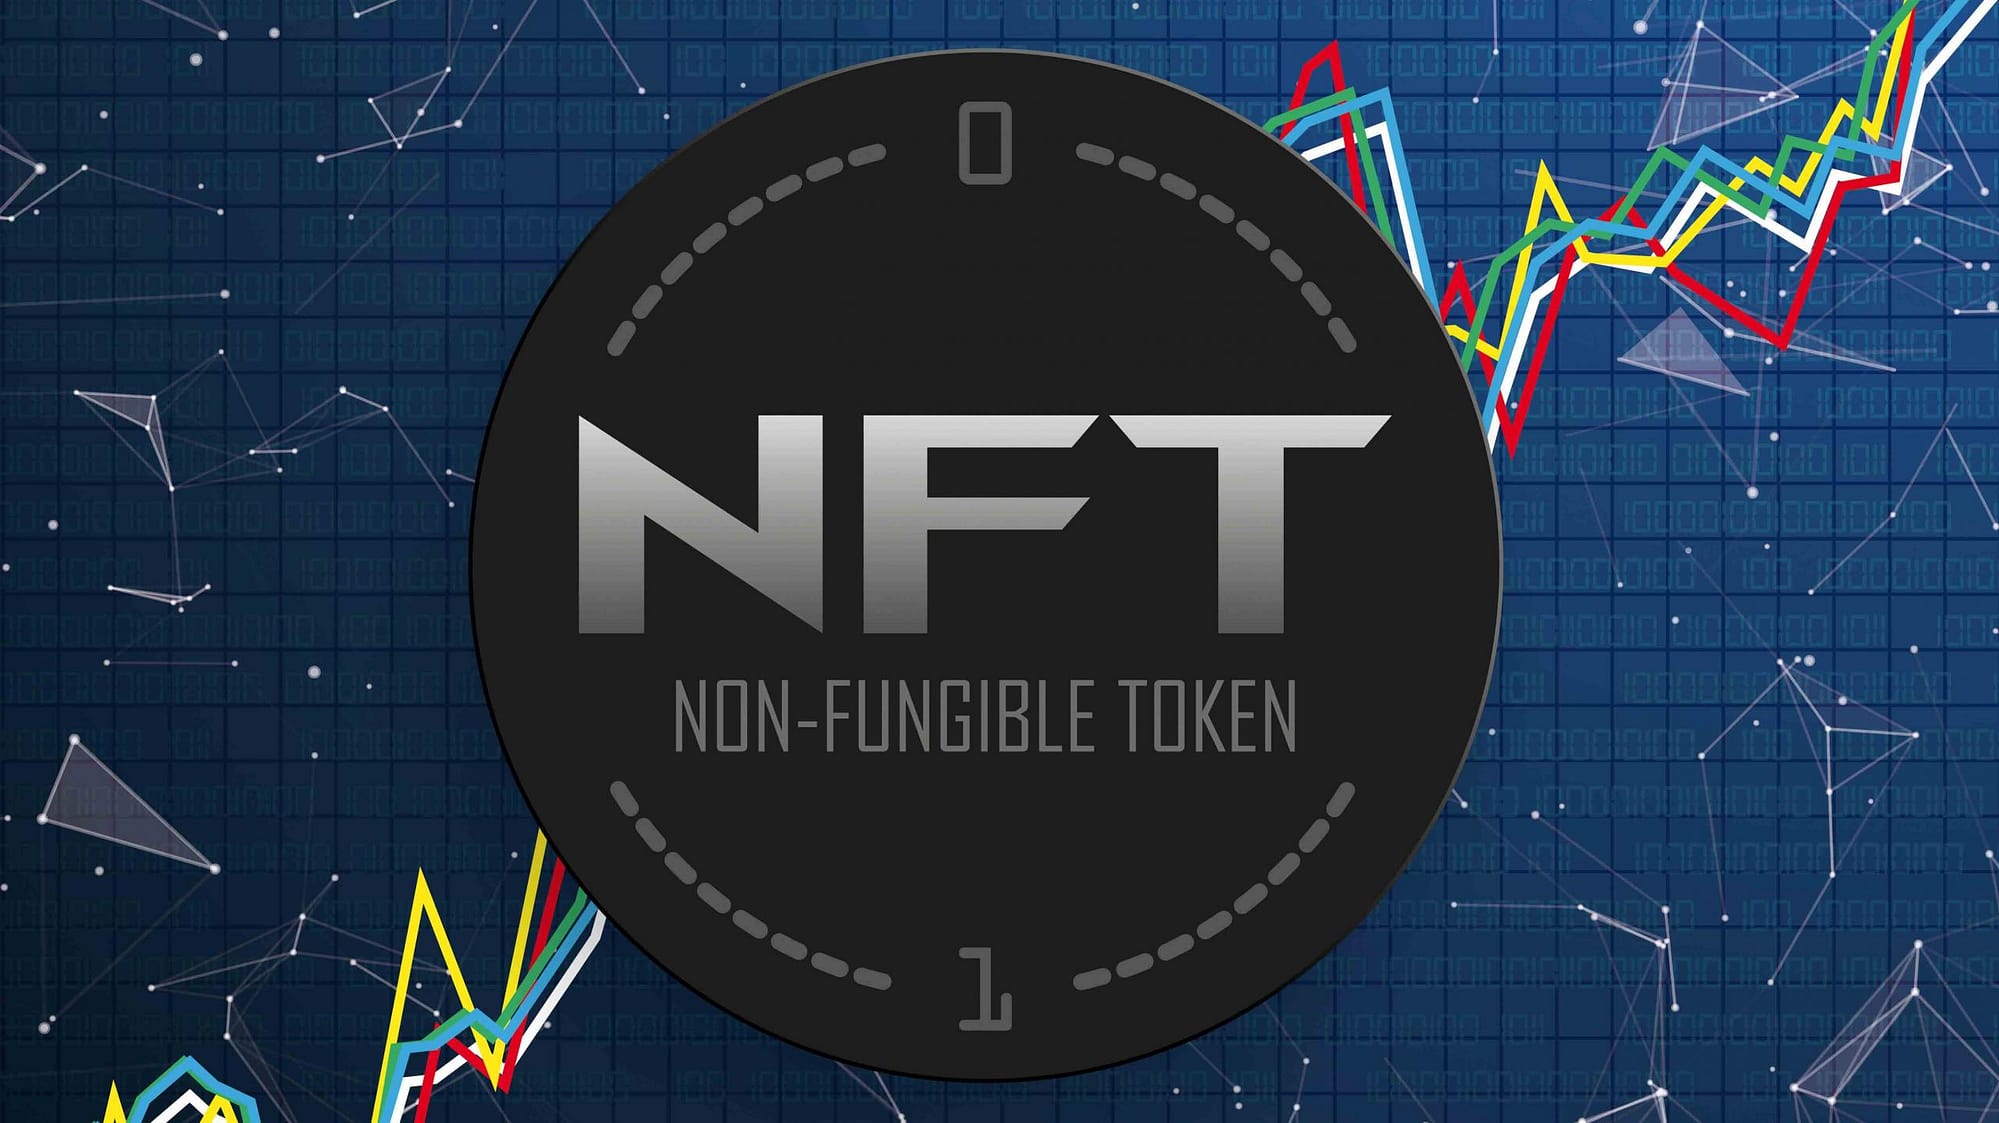 Investors sent $40 billion worth of cryptocurrency to smart contracts associated with NFT collections